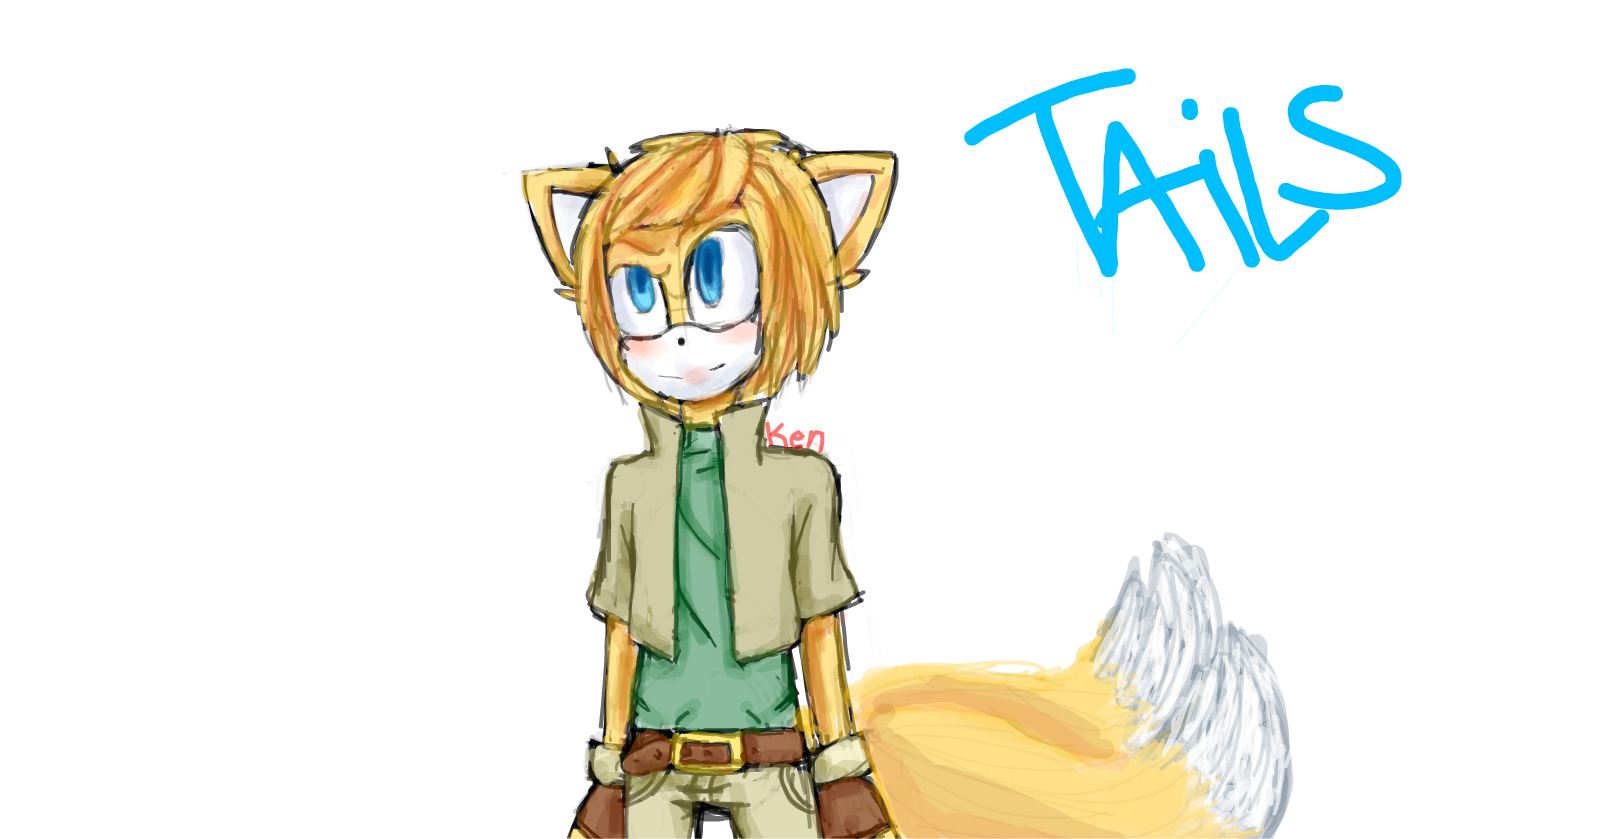 Tails in my style